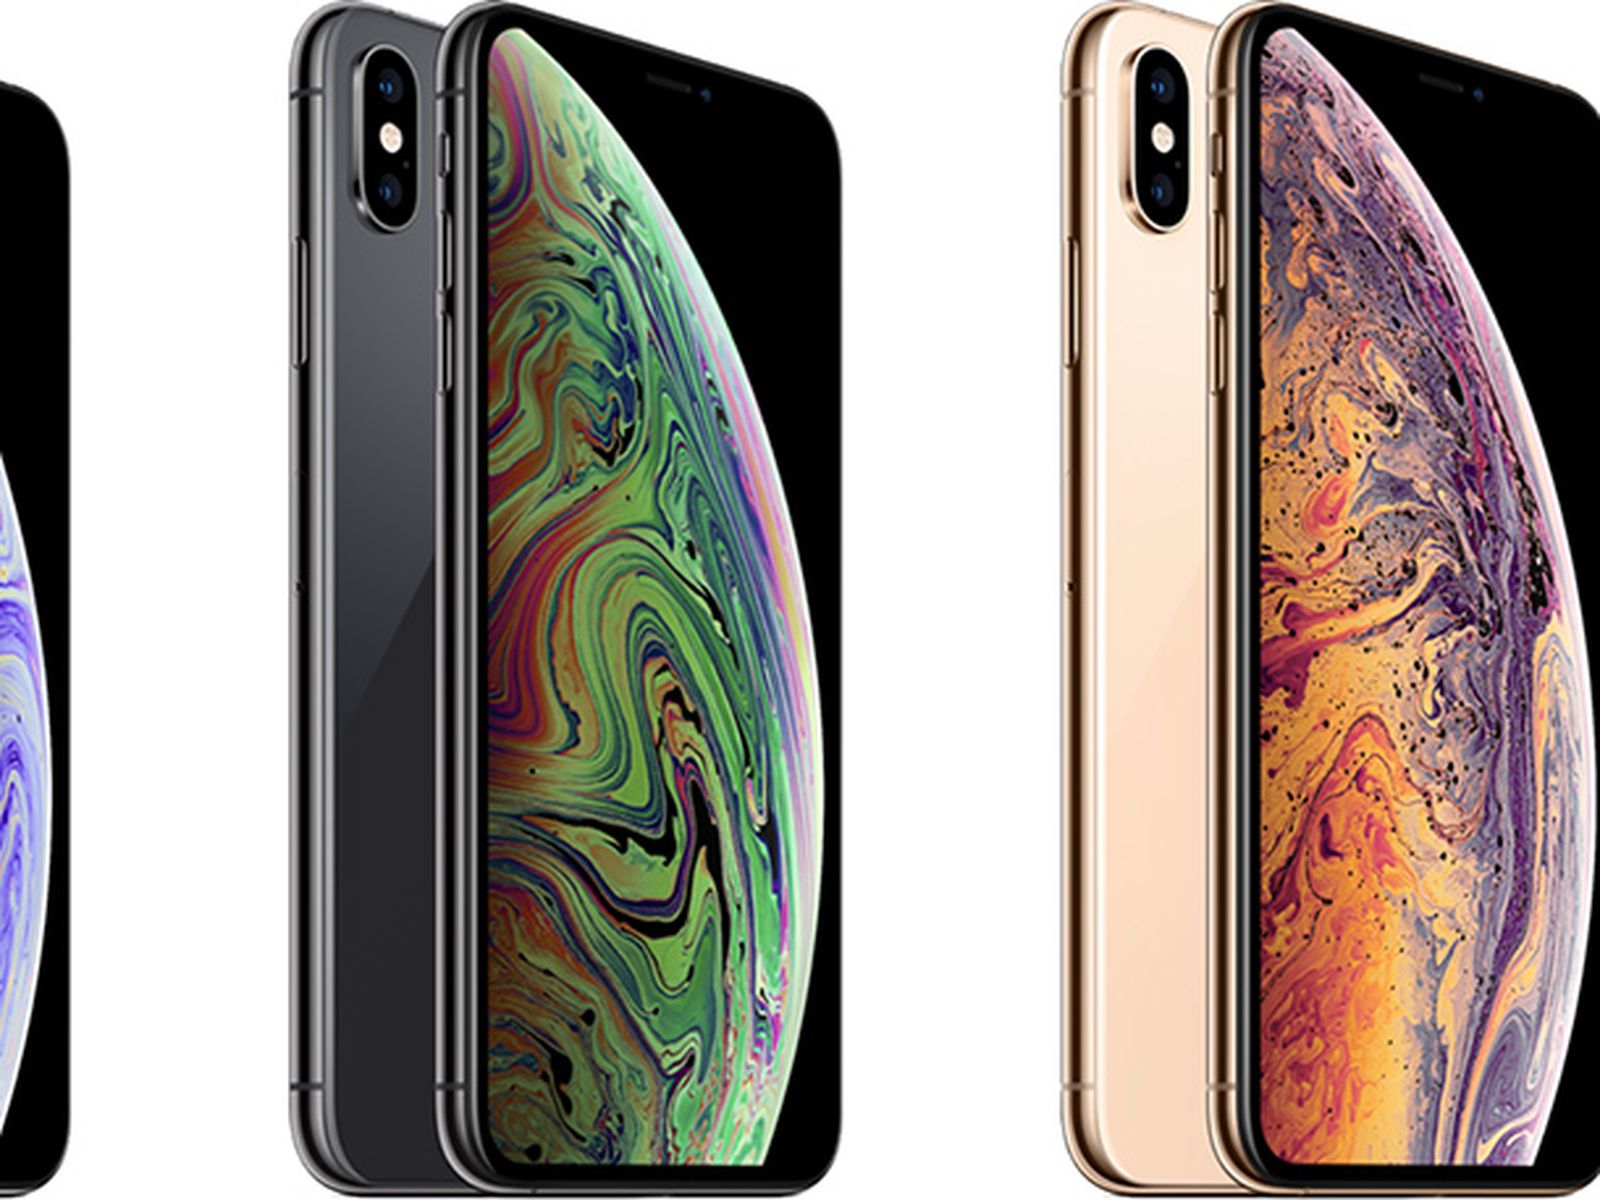 Iphone Xs And Iphone Xs Max Now Available For Pre Order Macrumors